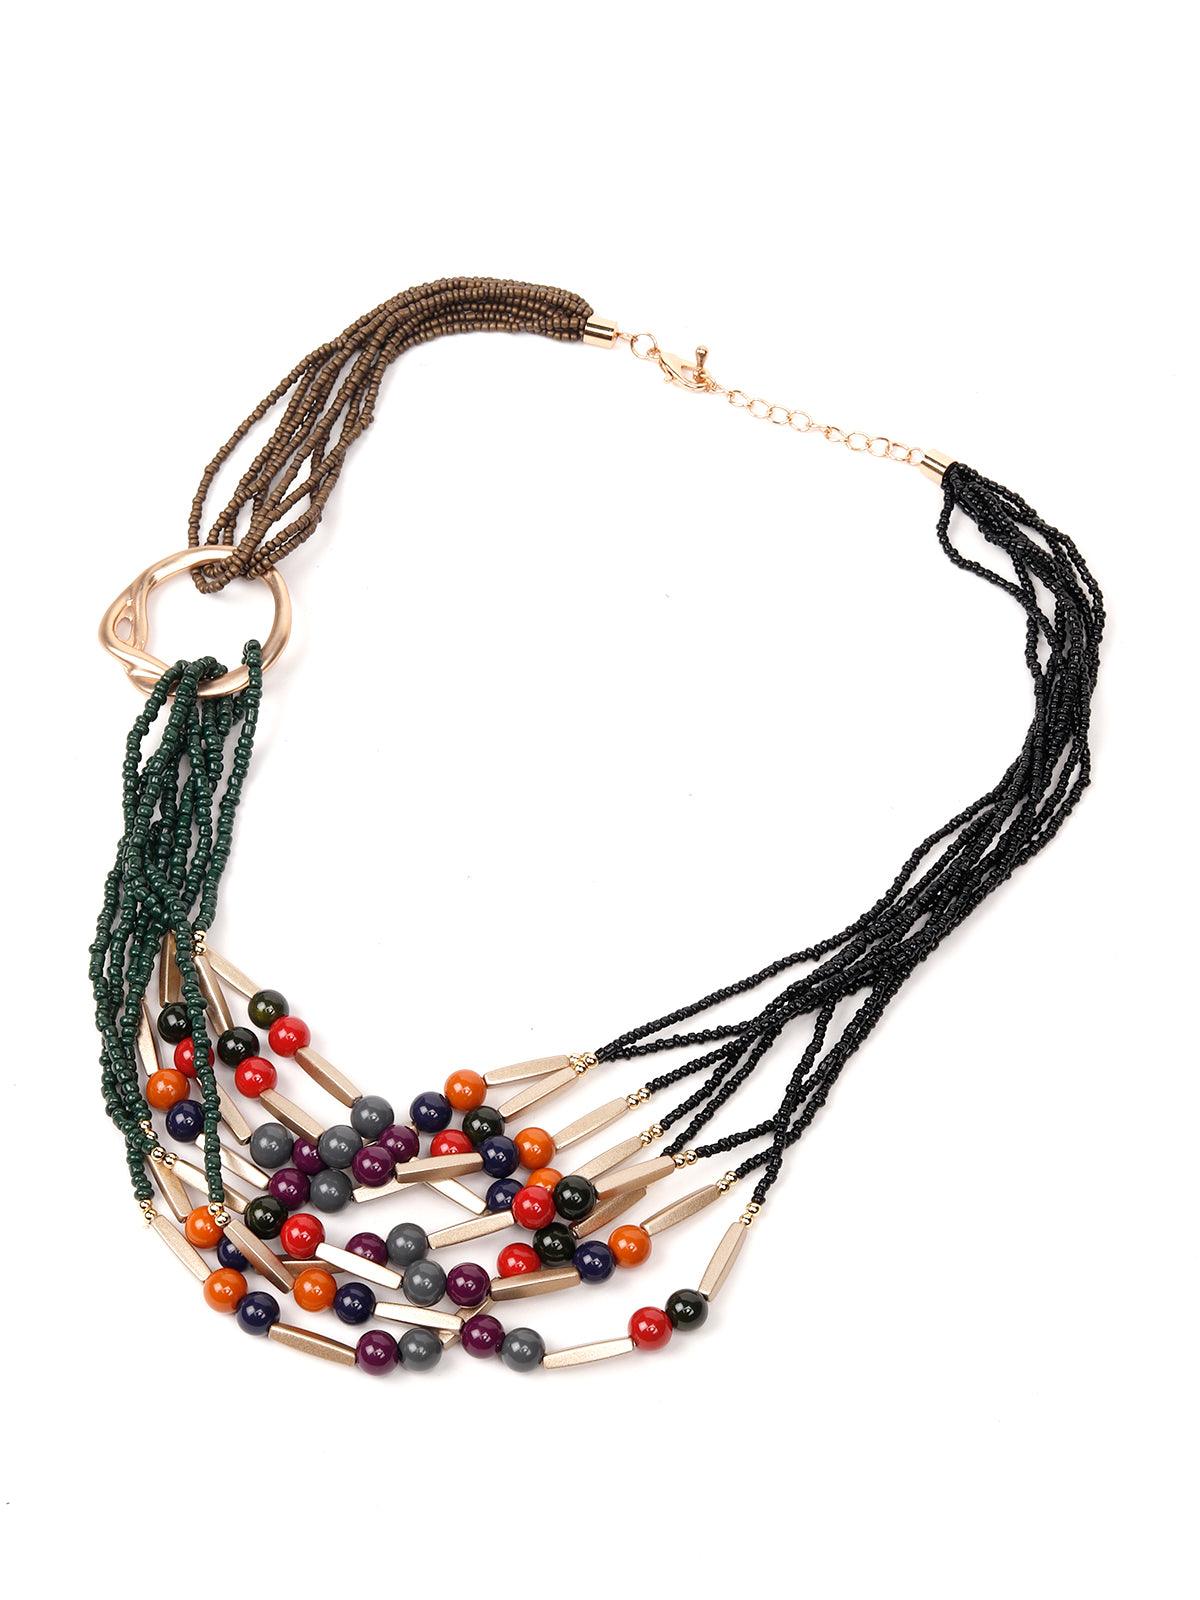 The Multi-Coloured Layered Statement Necklace For Women - Odette